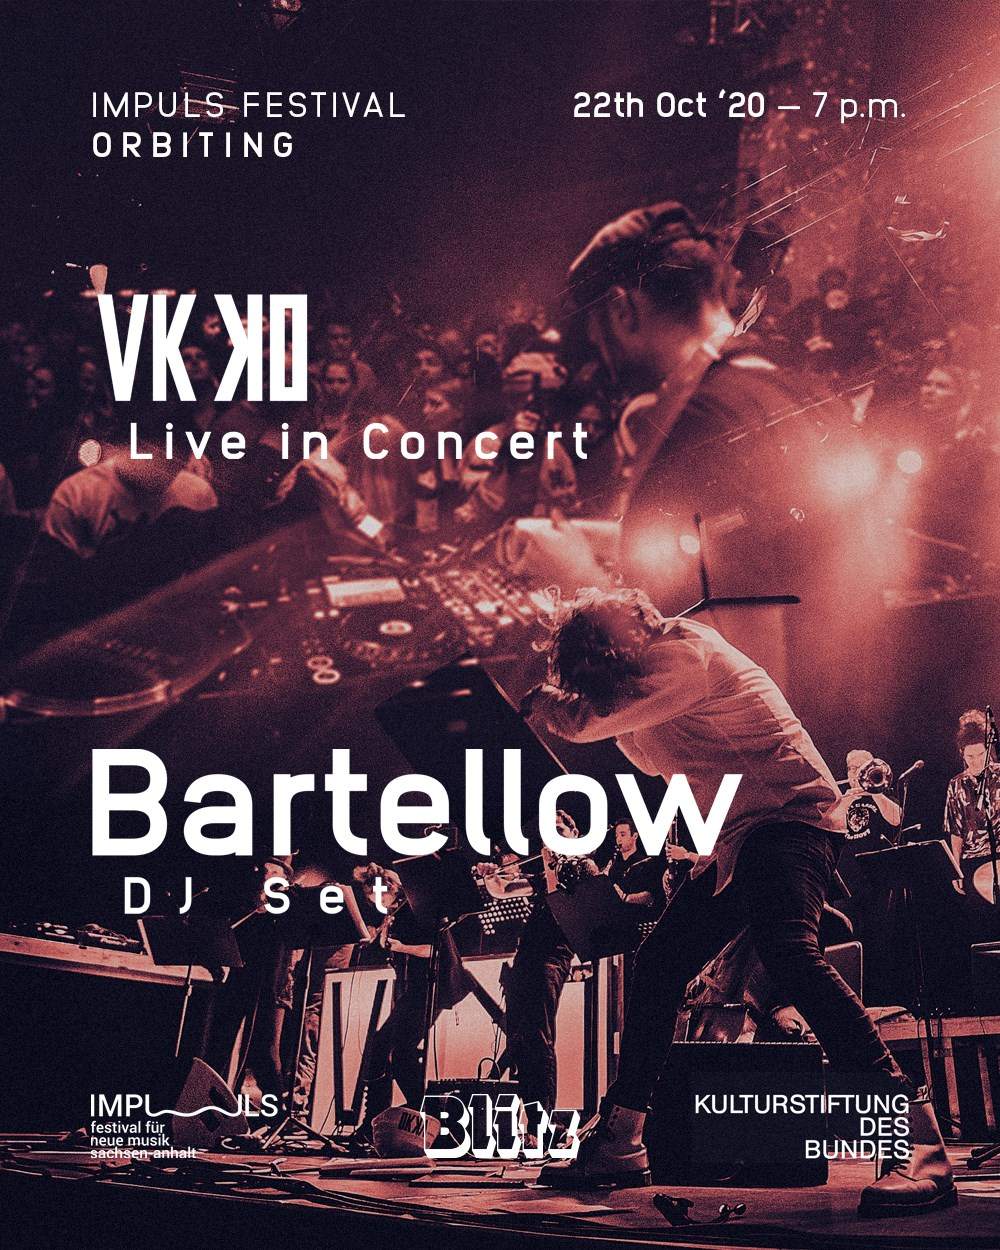 [CANCELLED] Impuls Festival: Orbiting with VKKO with Bartellow - フライヤー表